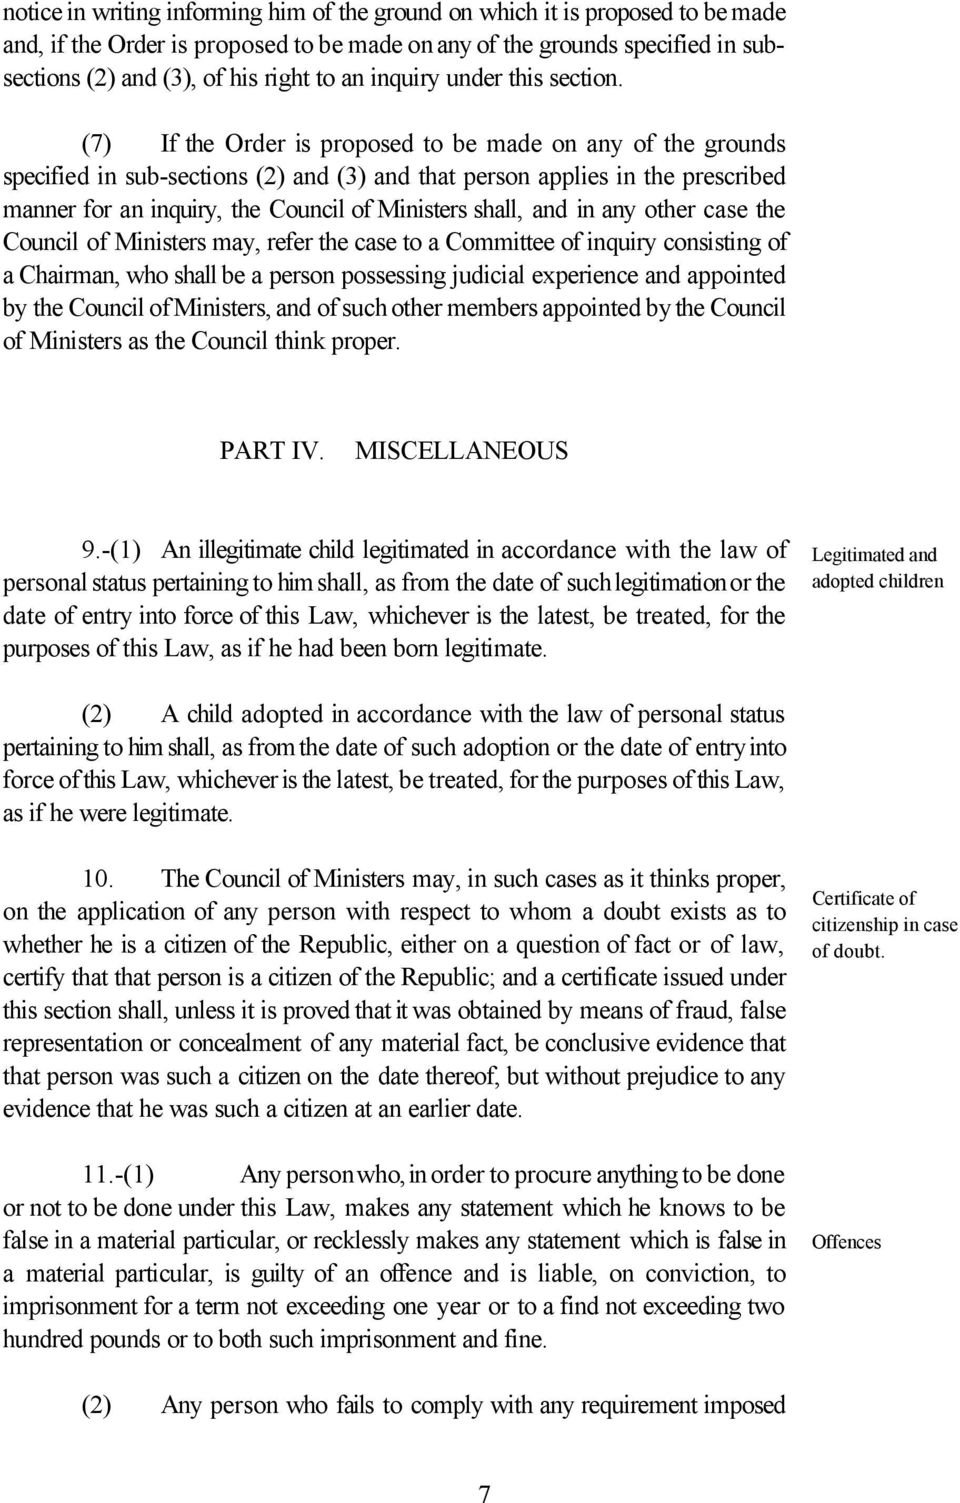 (7) If the Order is proposed to be made on any of the grounds specified in sub-sections (2) and (3) and that person applies in the prescribed manner for an inquiry, the Council of Ministers shall,